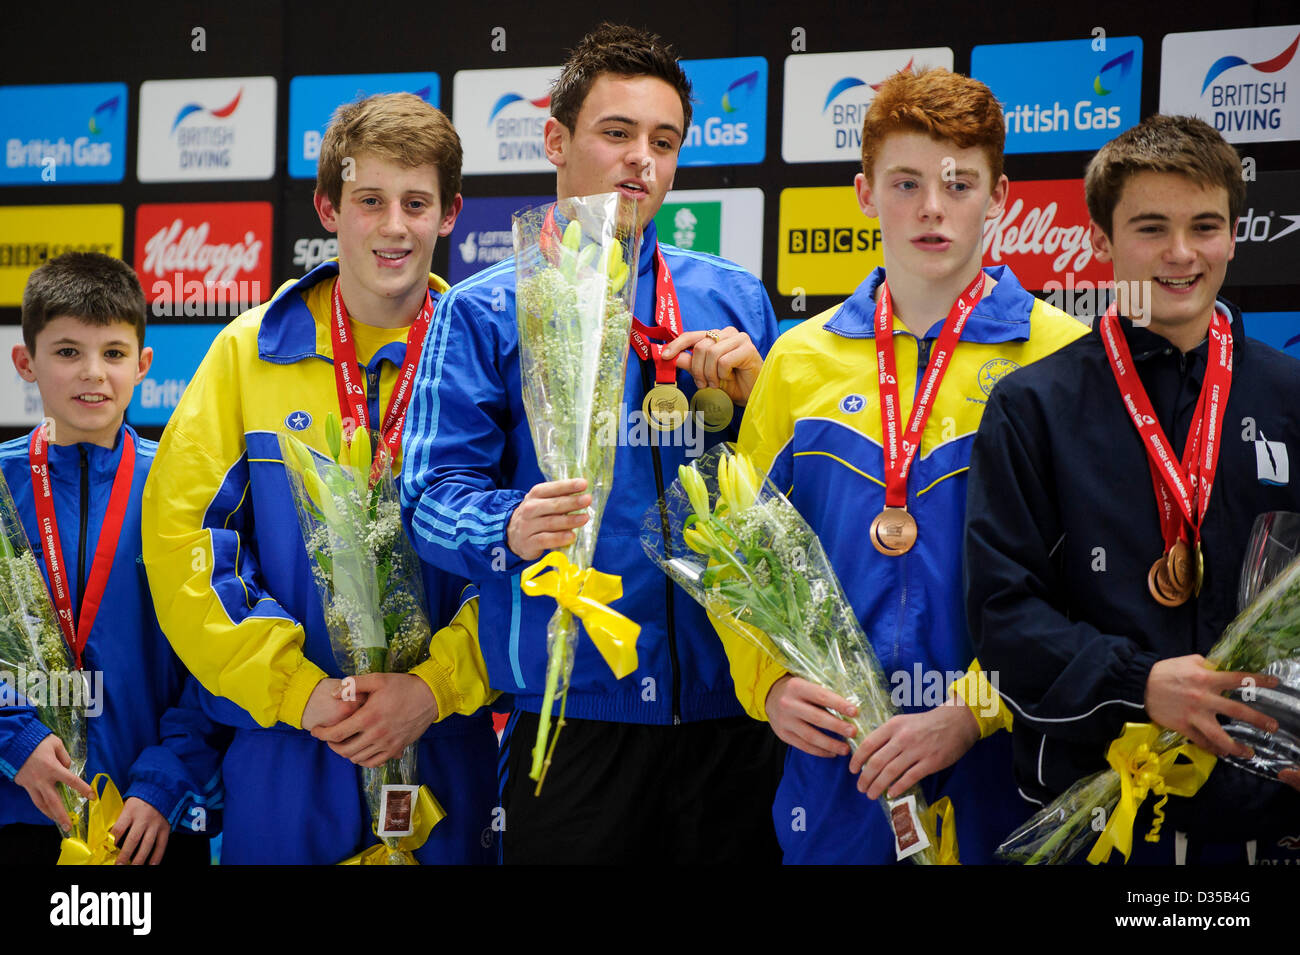 10.02.2013 Plymouth, England. The Mens 10m Platform Final podium. L-R Junior Runner-Up Matthew Dixon (Plymouth Diving), Senior runner-up James Denny (City of Leeds Diving Club), Senior champion Tom Daley (Plymouth Diving), Junior third placed finisher Sam Thornton (City of Leeds Diving Club) and Senior third place and Junior campion Daniel Goodfellow (Cambridge Dive Team) pose on Day 3 of the British Gas Diving Championships 2013 at Plymouth Life Centre. Stock Photo